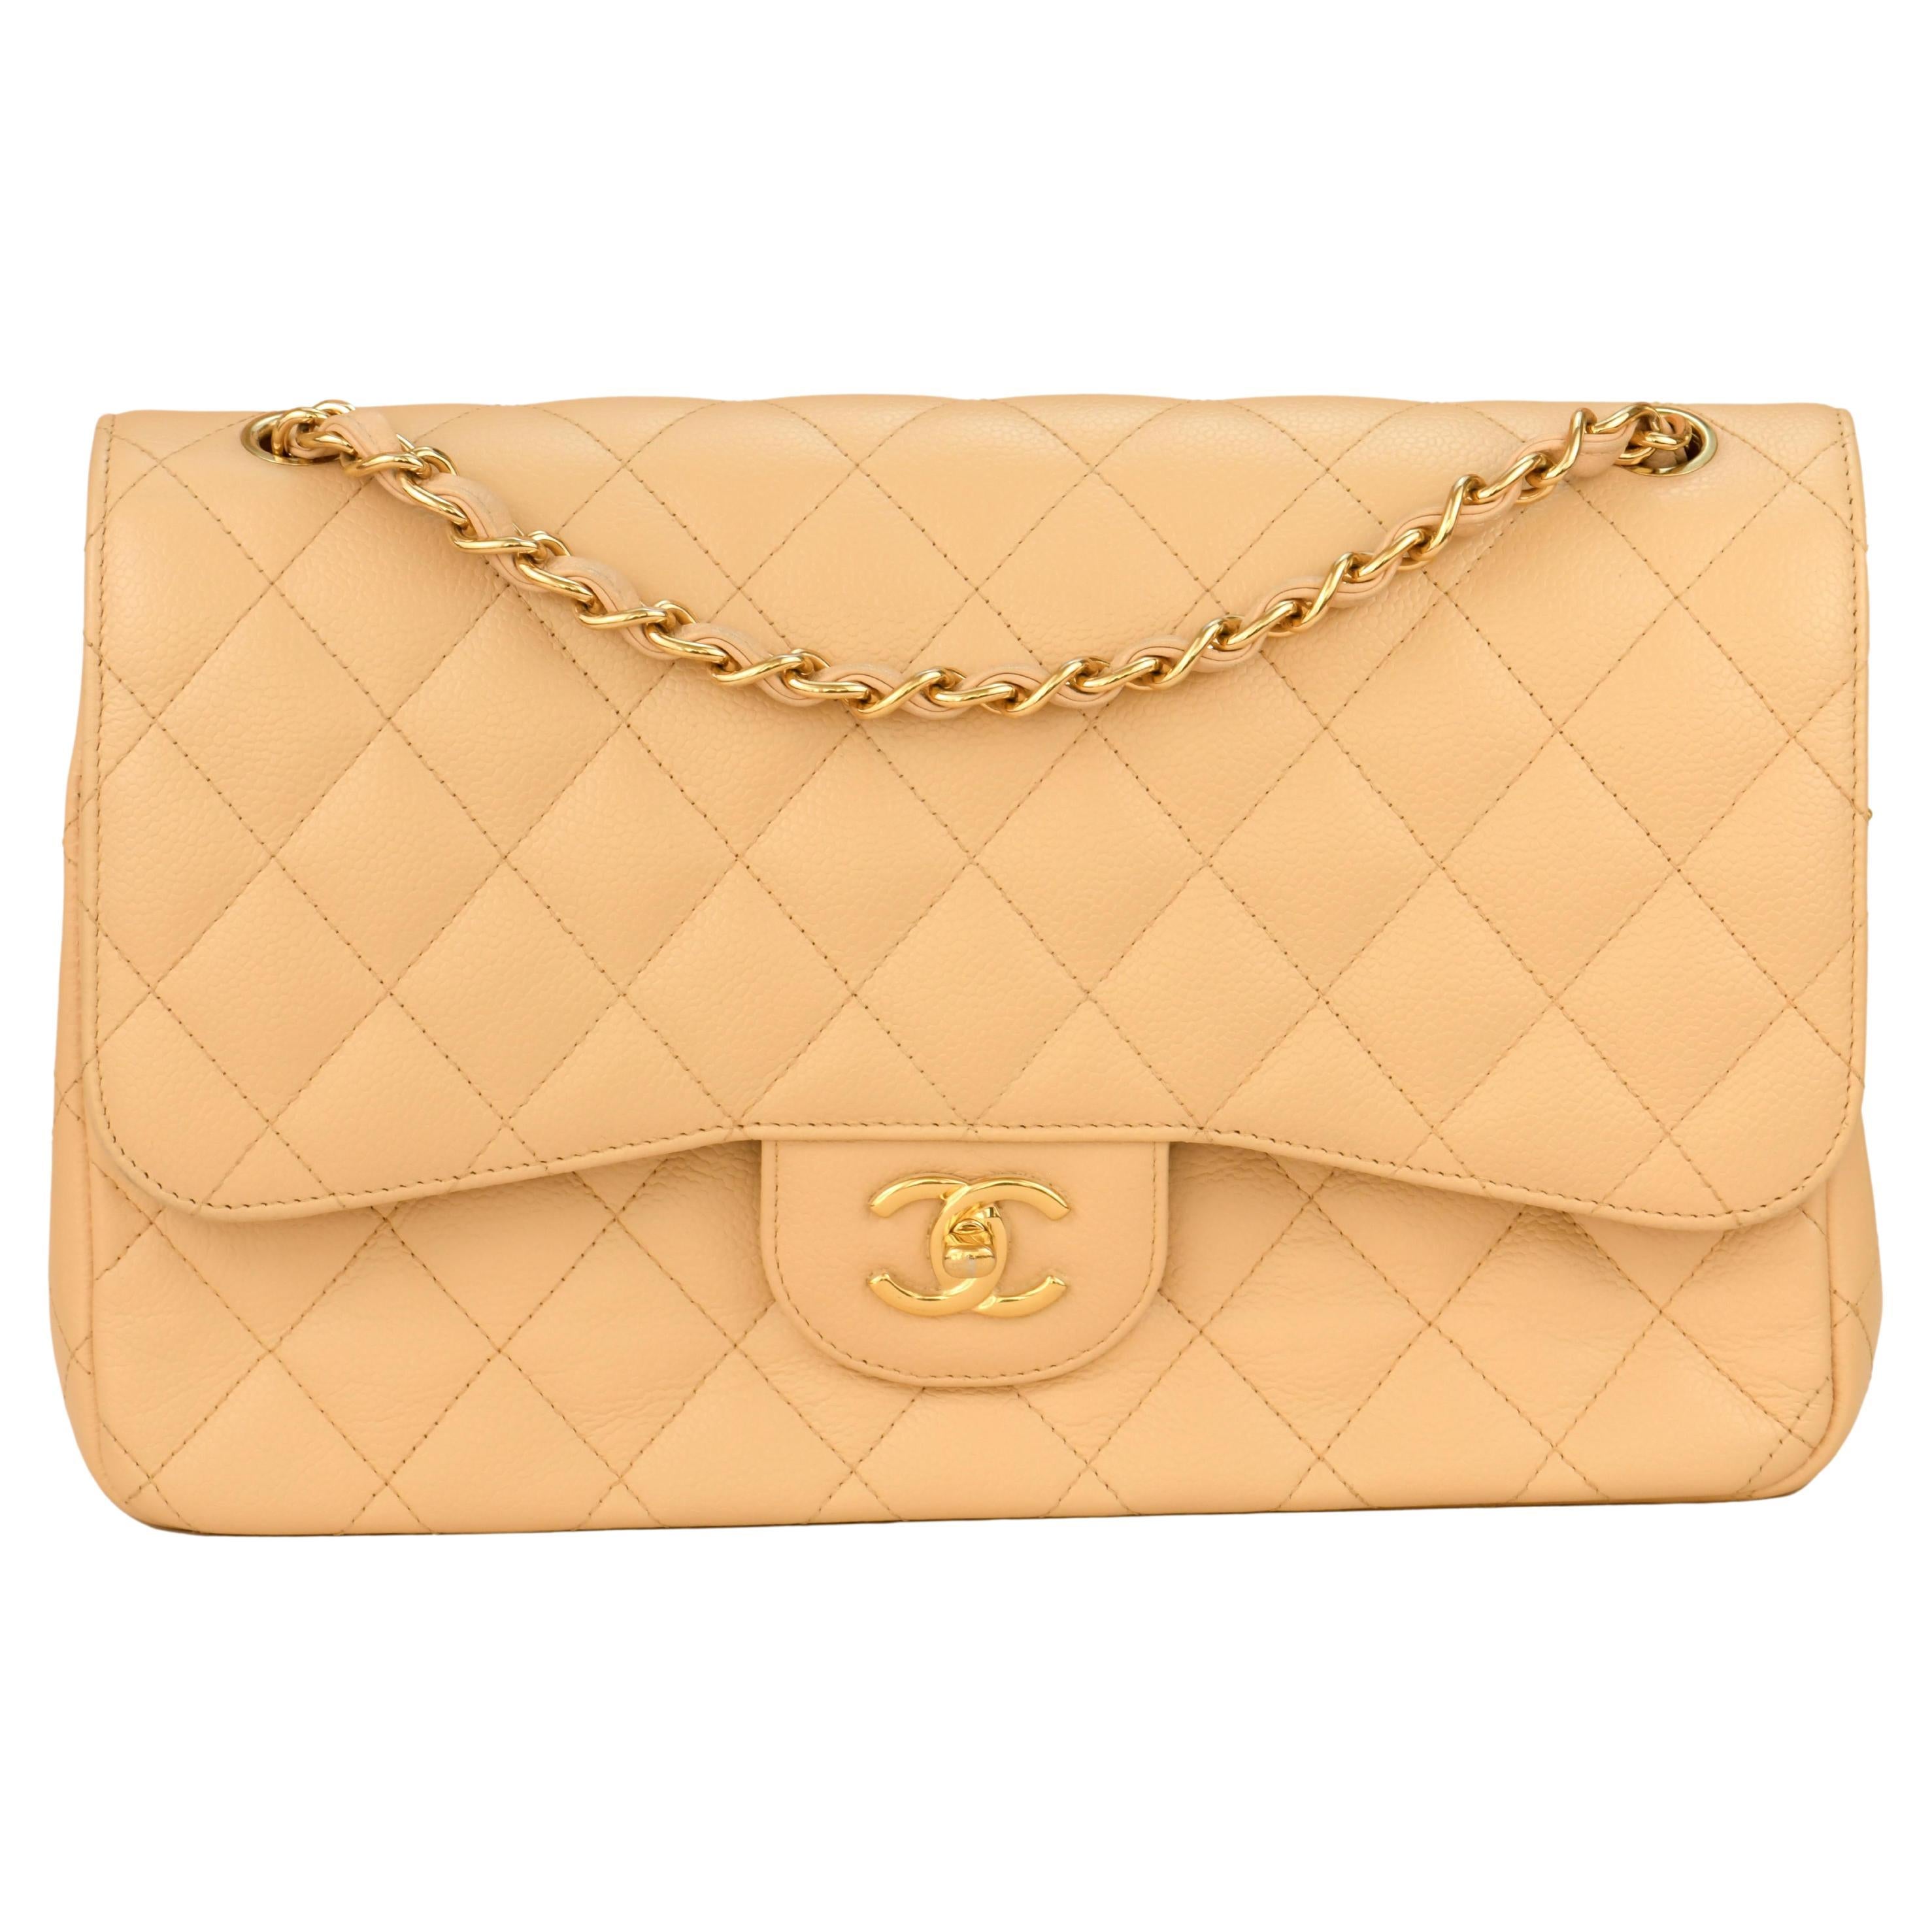 Chanel Beige Calfskin Leather Jumbo Classic Double Flap Bag For Sale